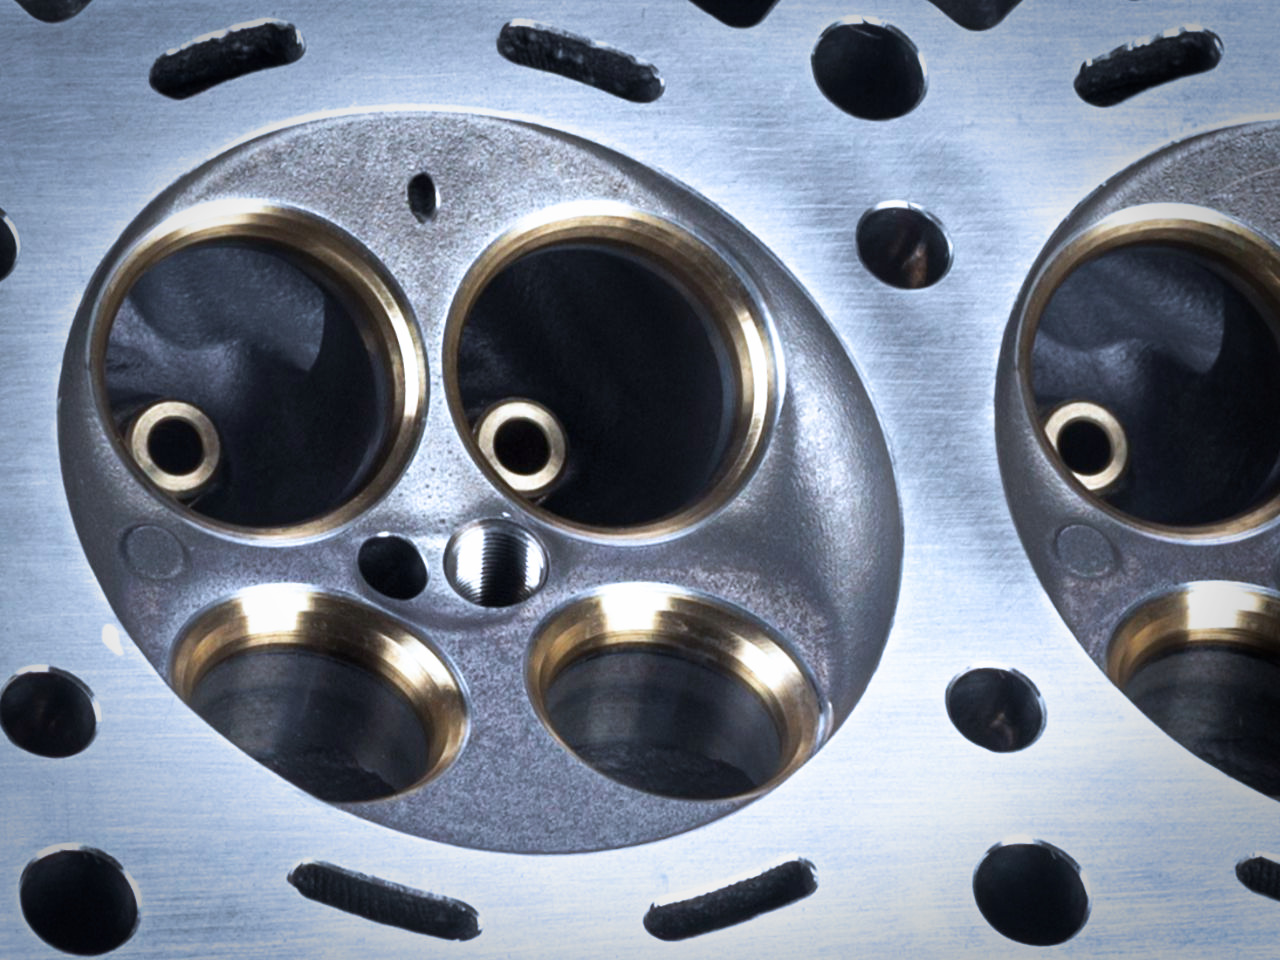 [Translate to Englisch:] Inlet ports of a cylinder head